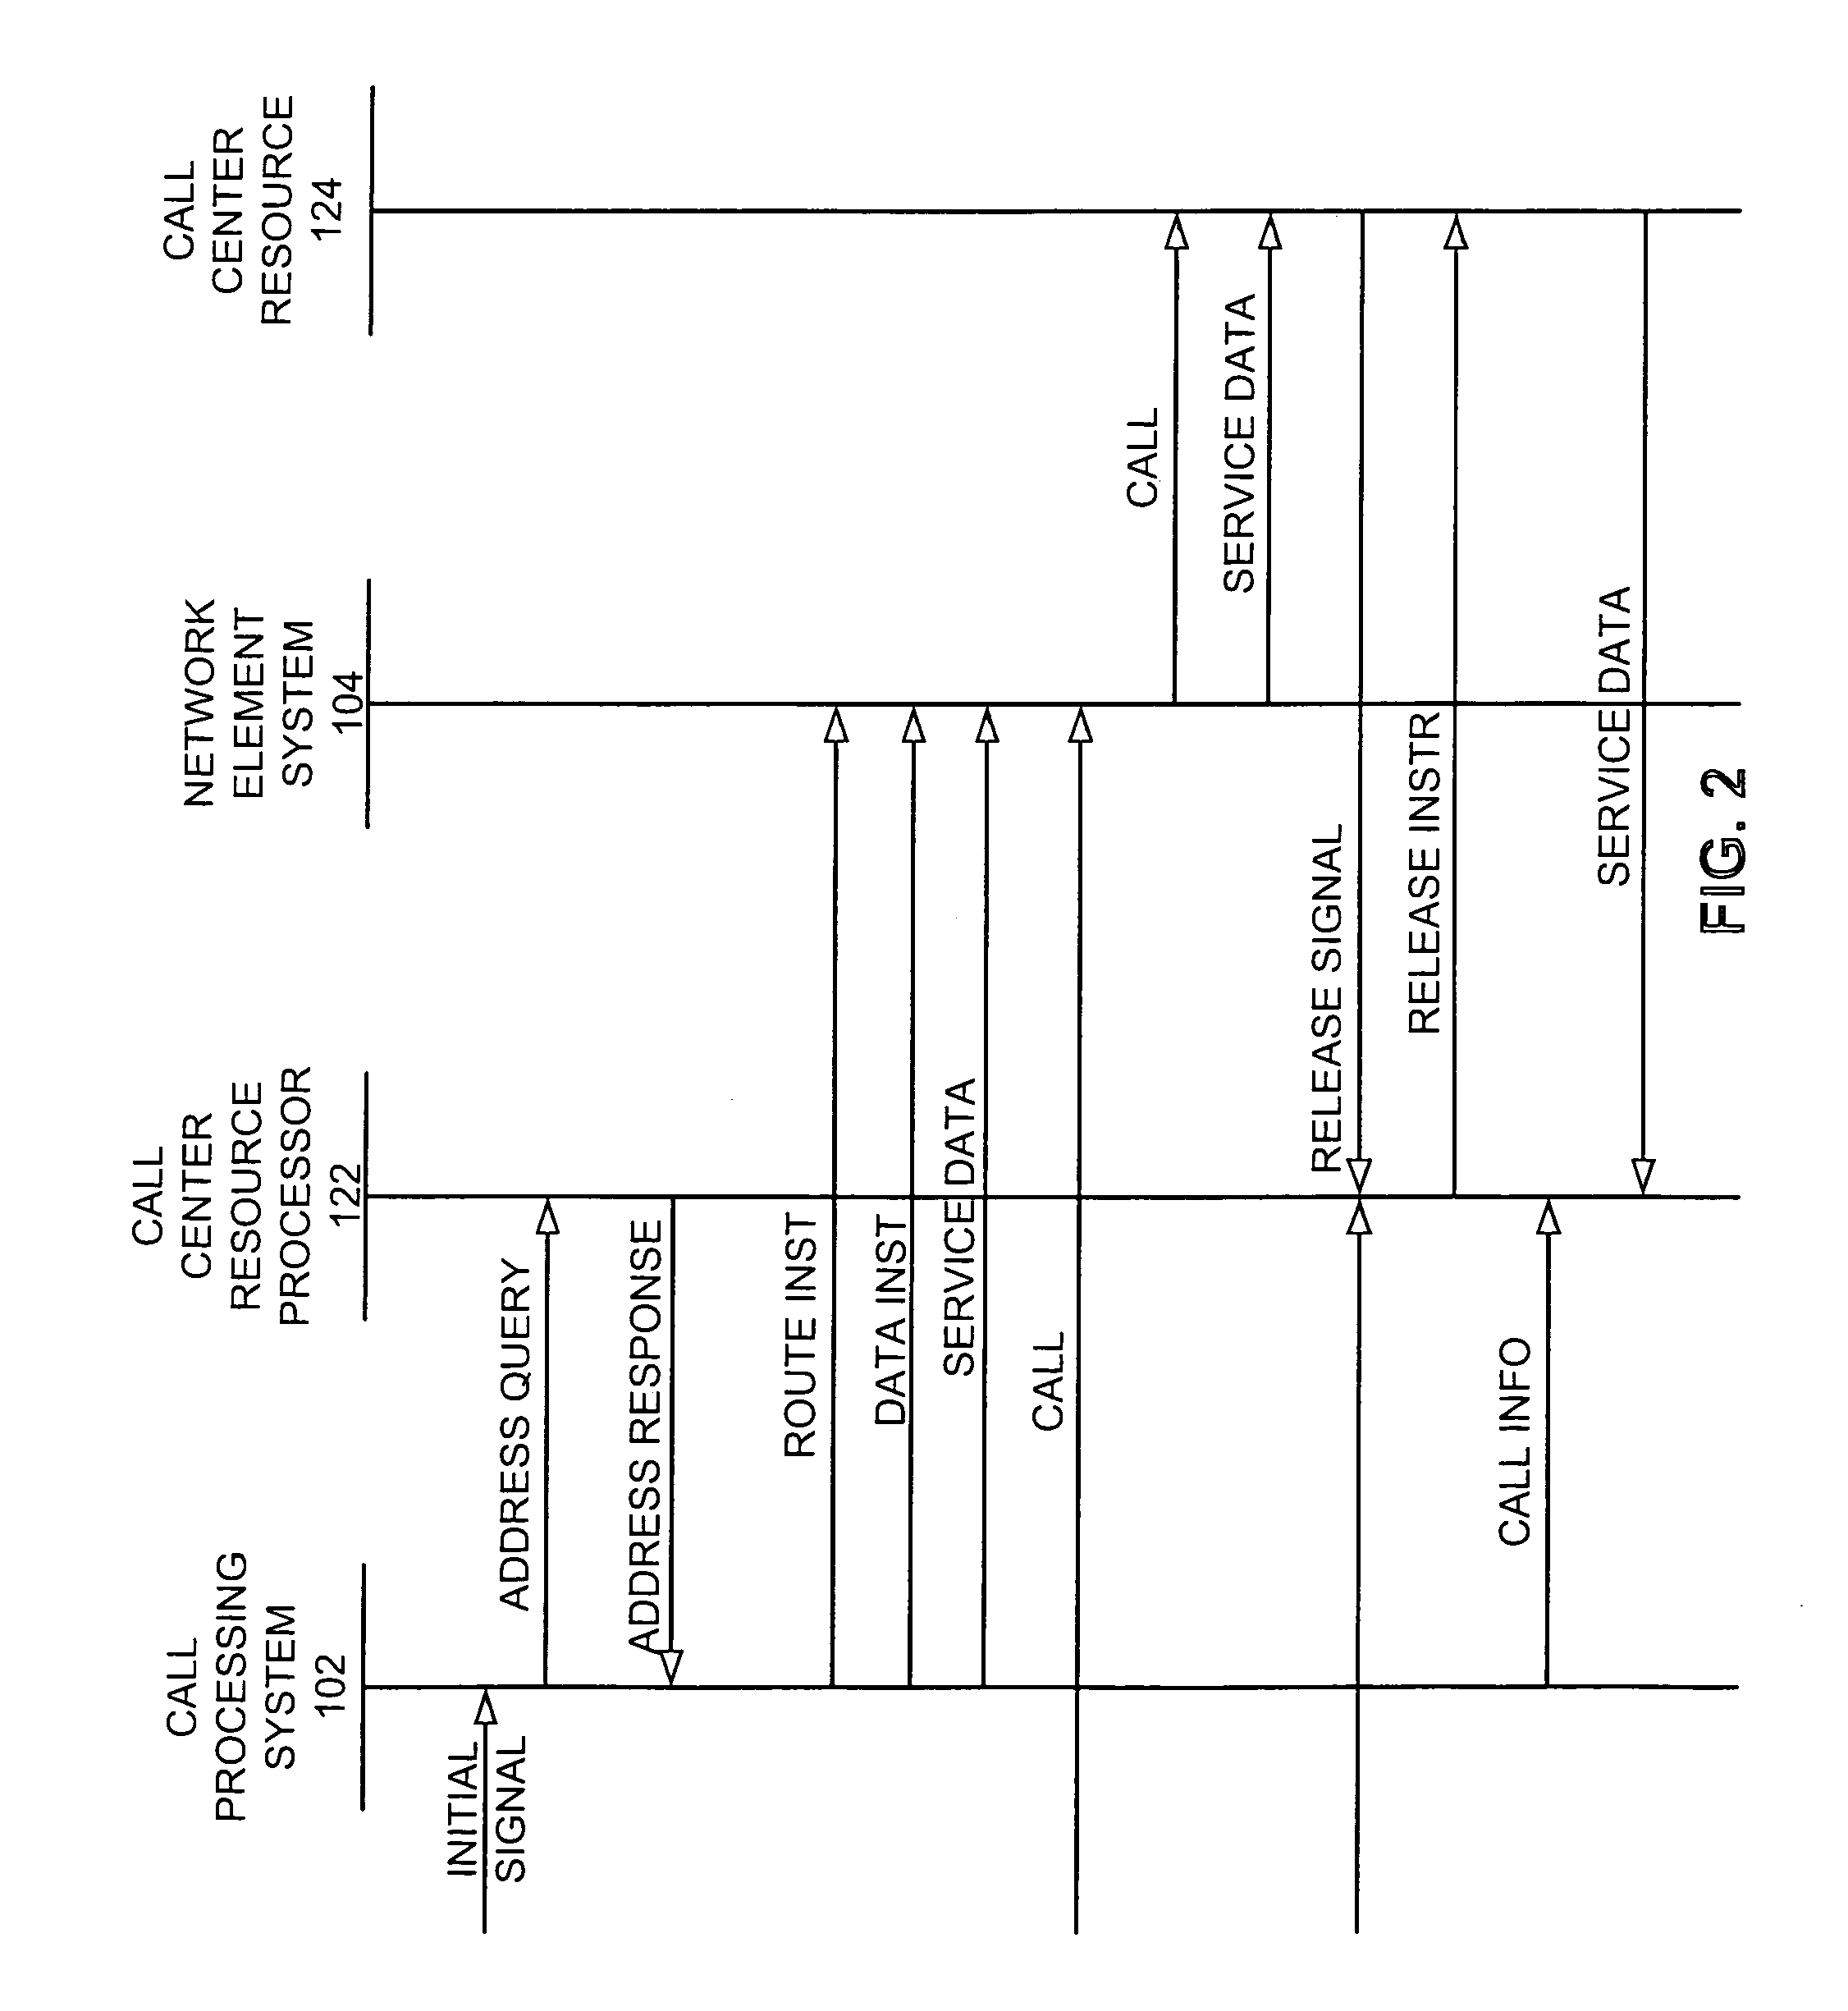 Call processing system and service control point for handling calls to a call center